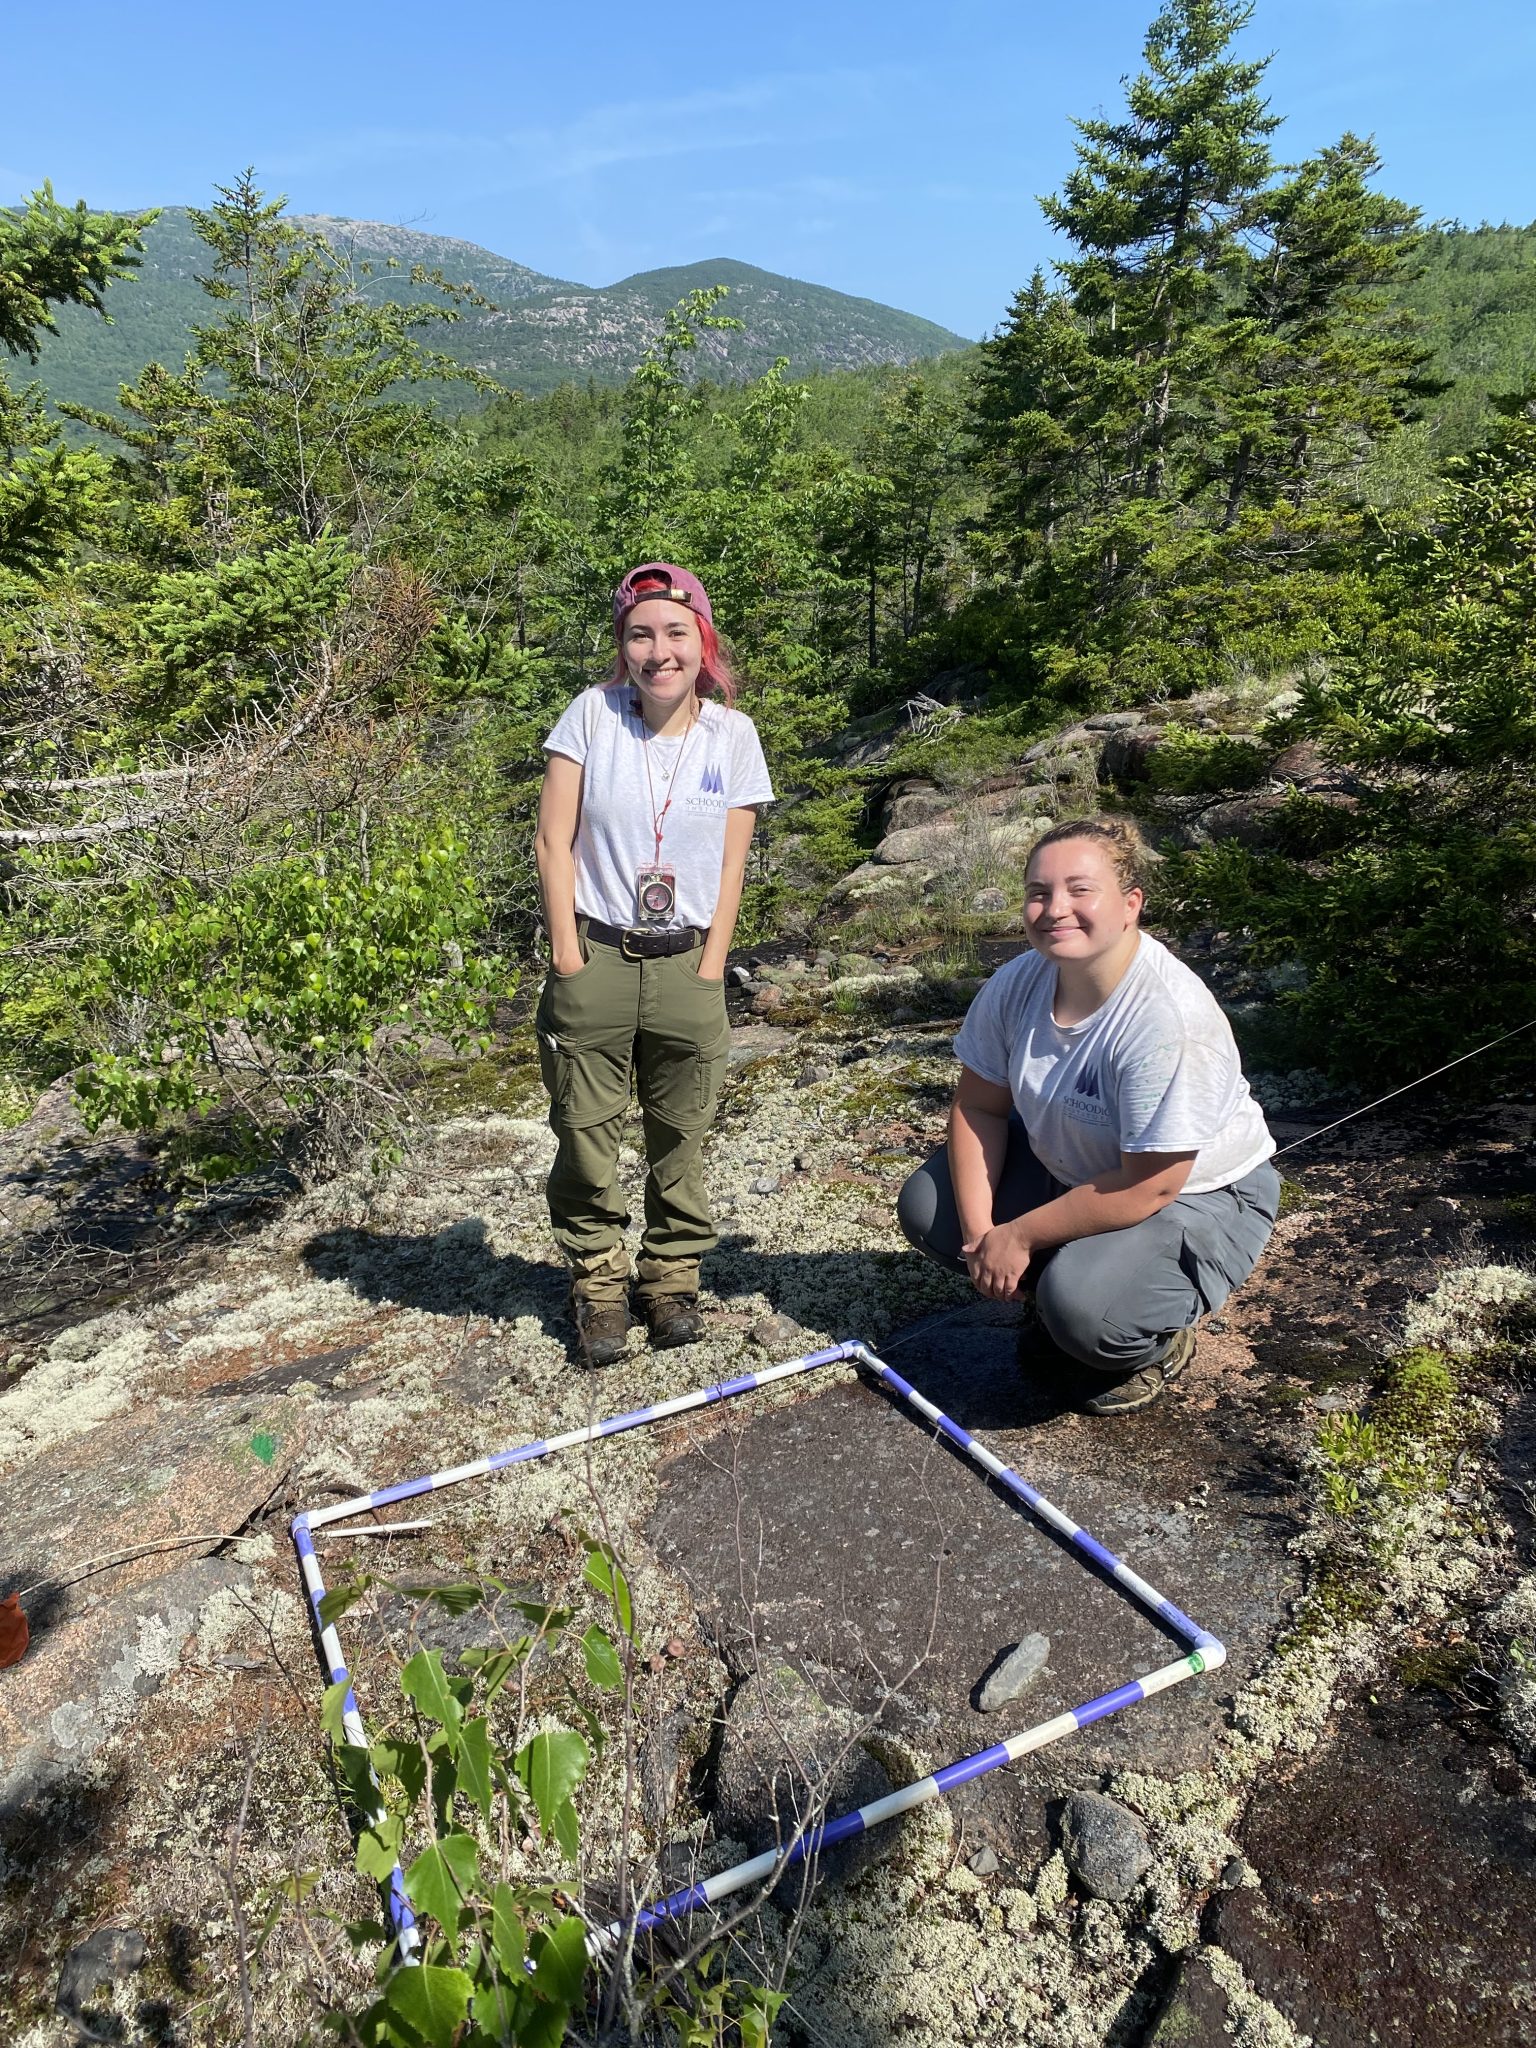 Two early-career researchers identifying plants in an empty quadrat on a mountain in Acadia National Park under a clear blue sky.